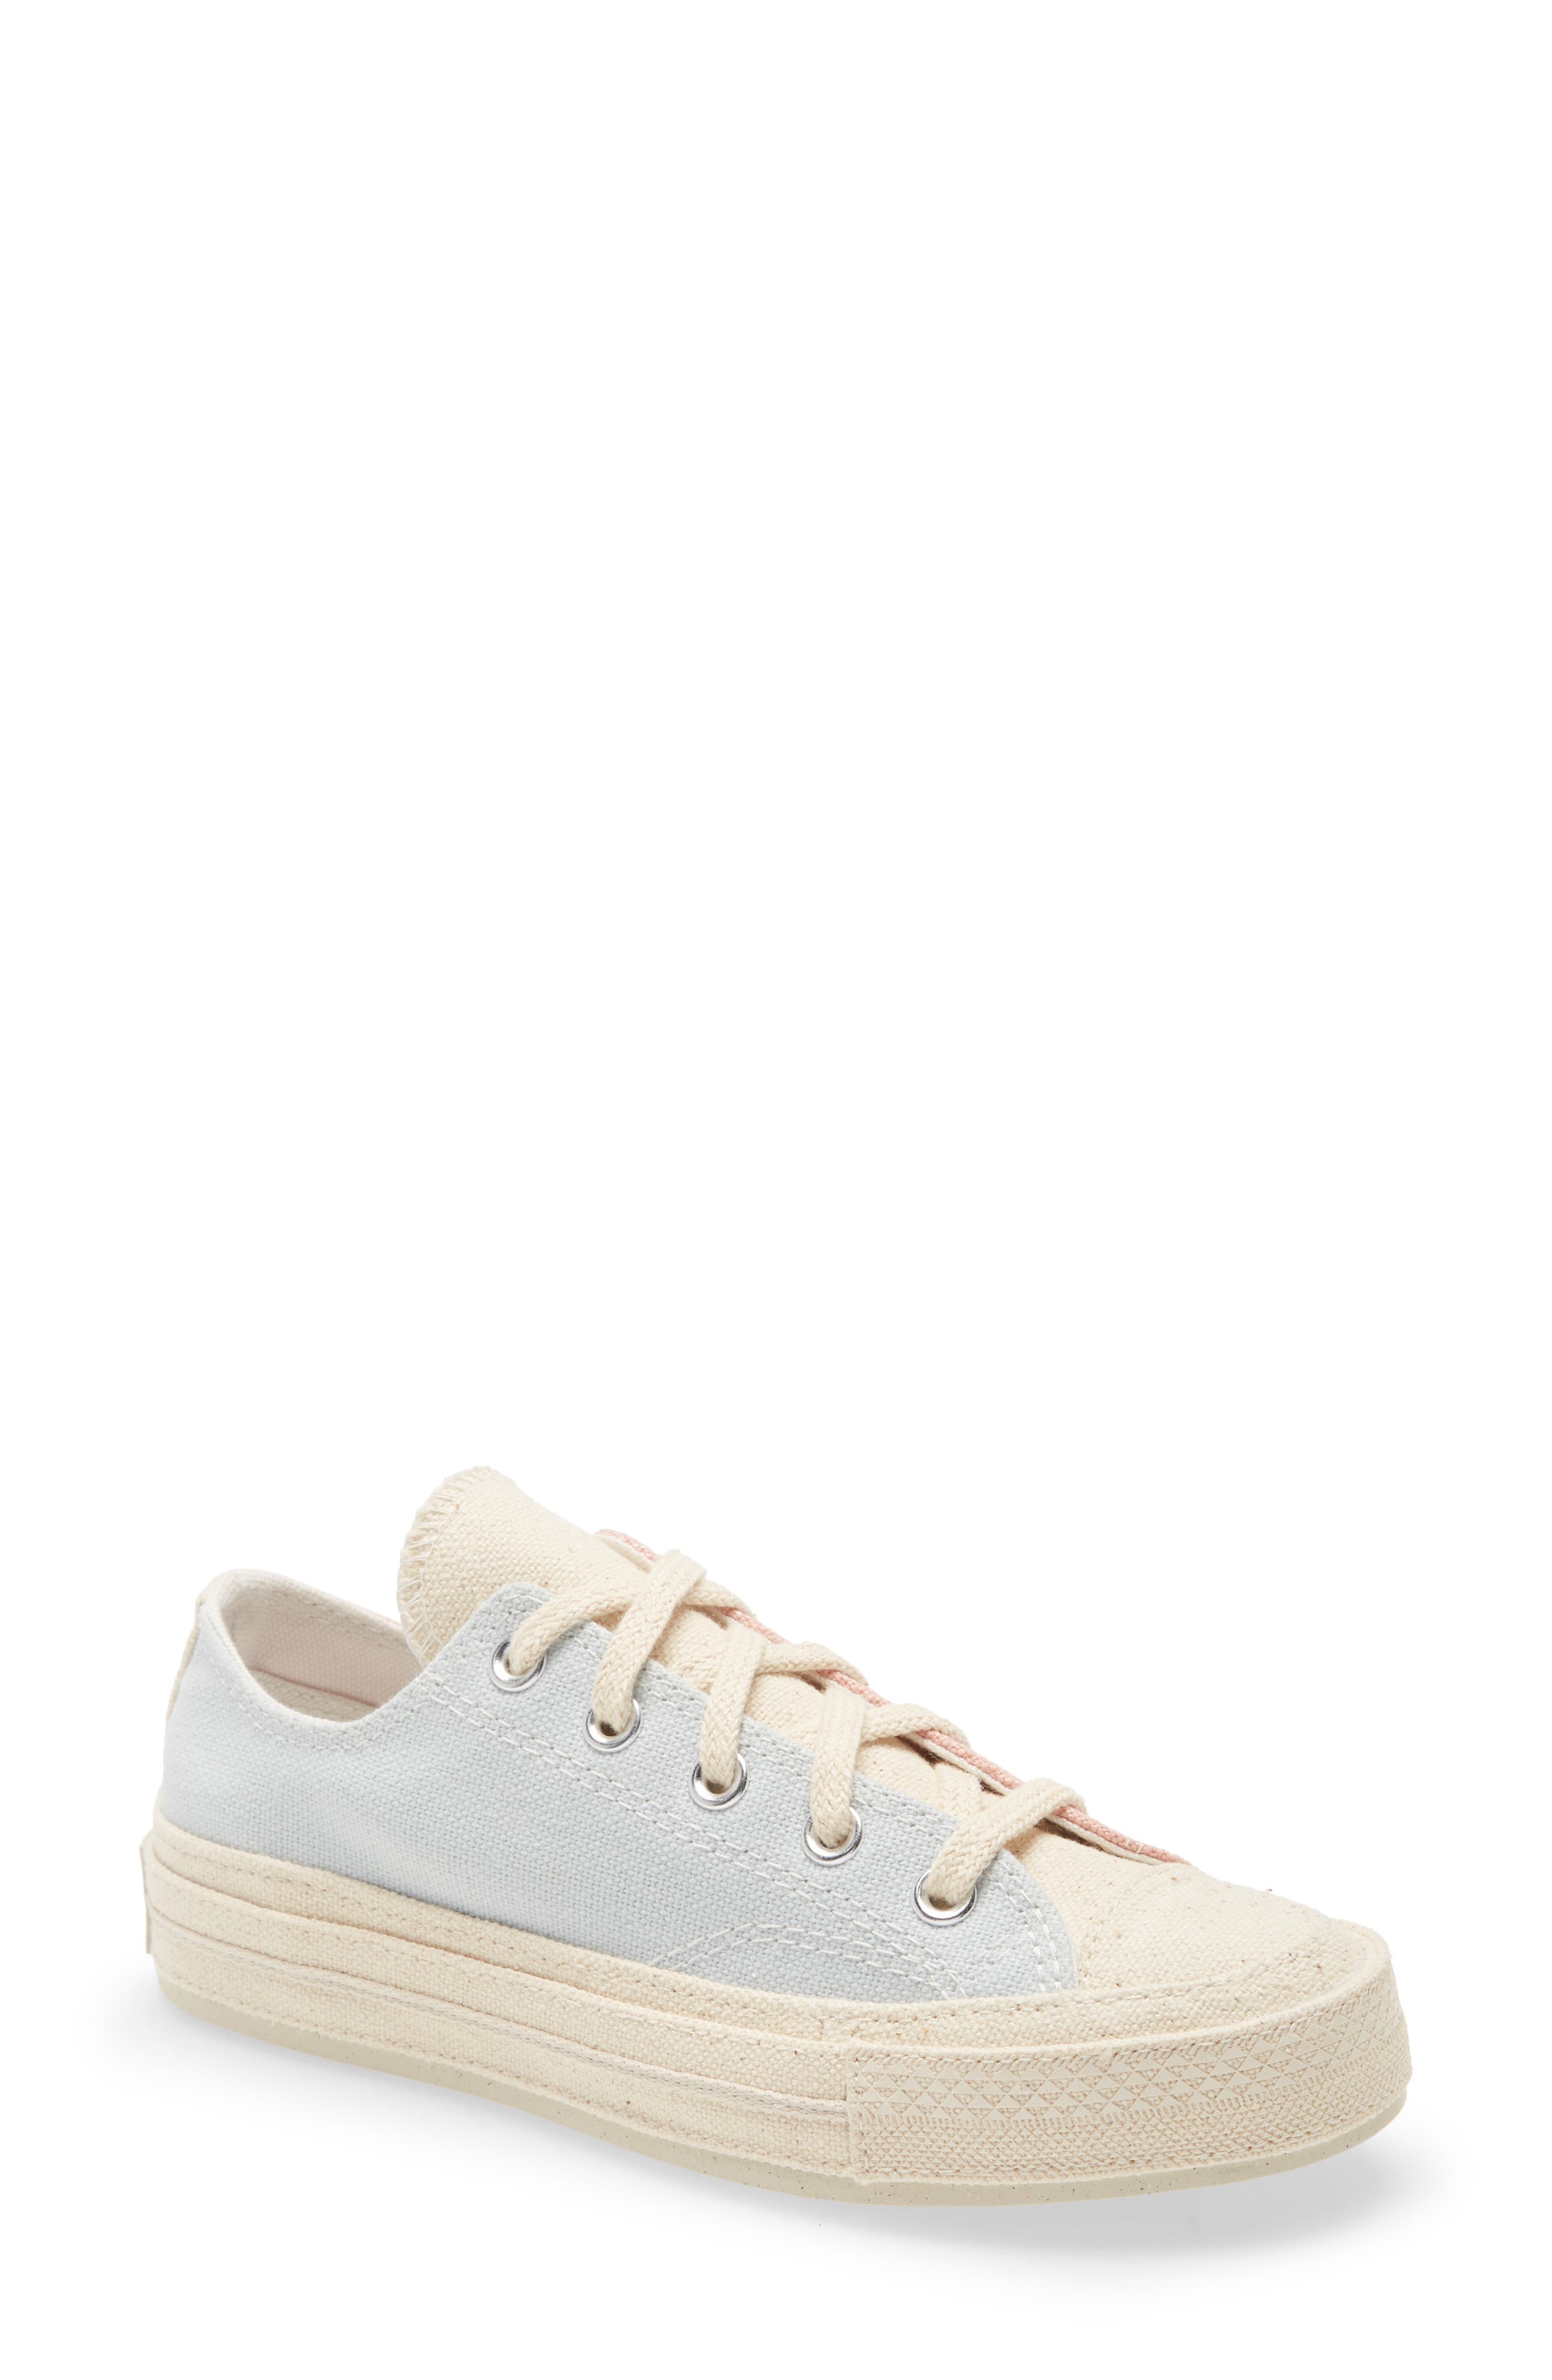 nordstrom womens converse